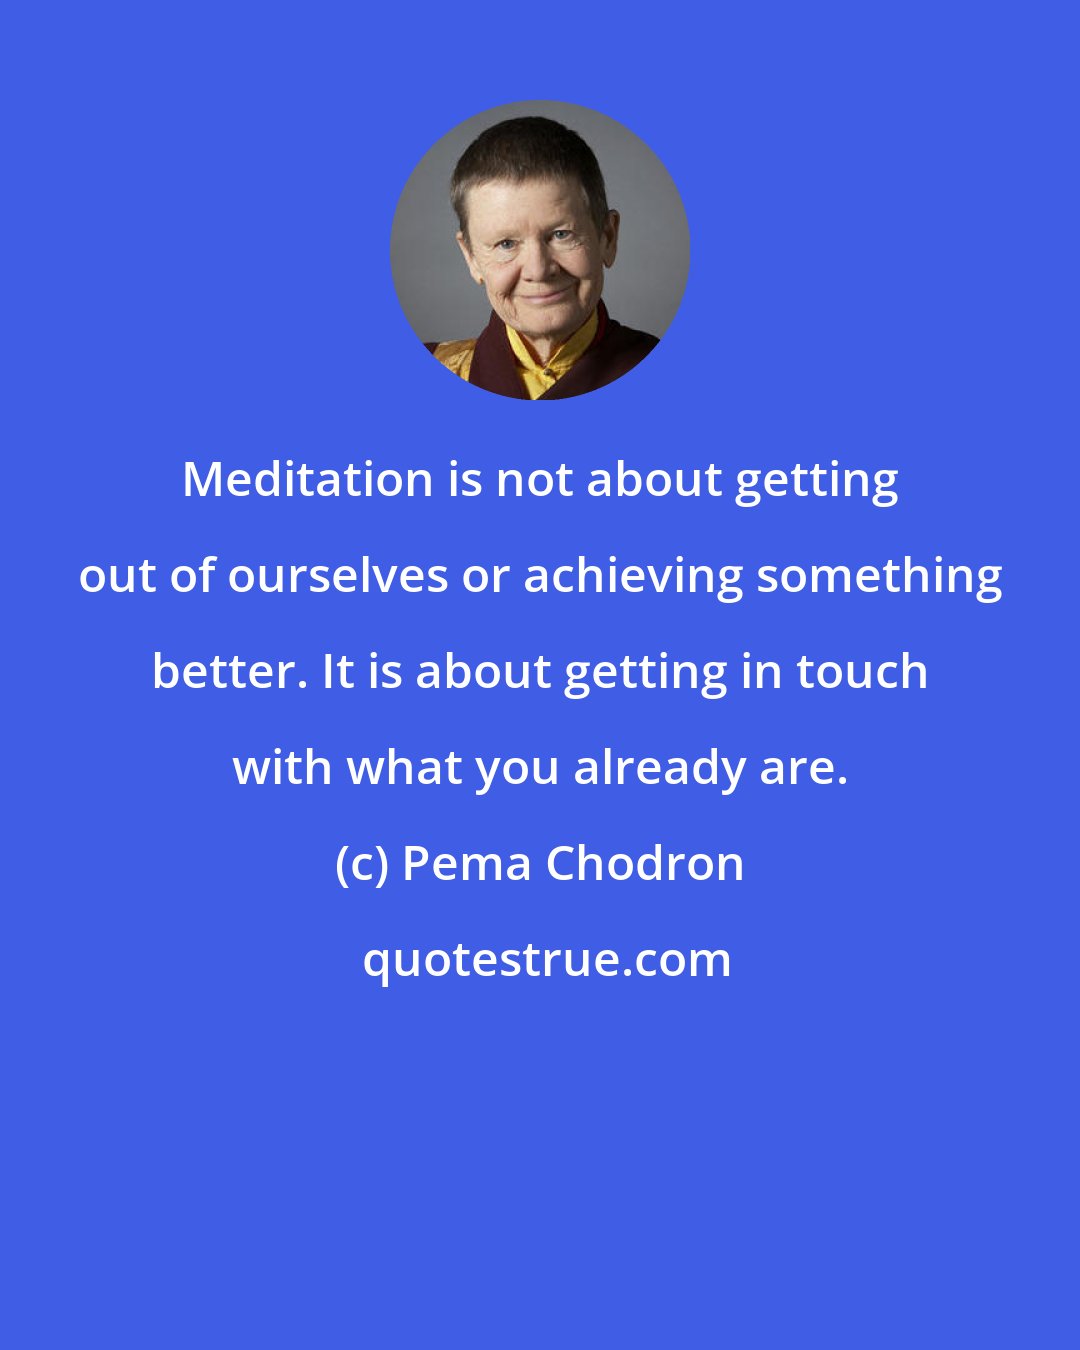 Pema Chodron: Meditation is not about getting out of ourselves or achieving something better. It is about getting in touch with what you already are.